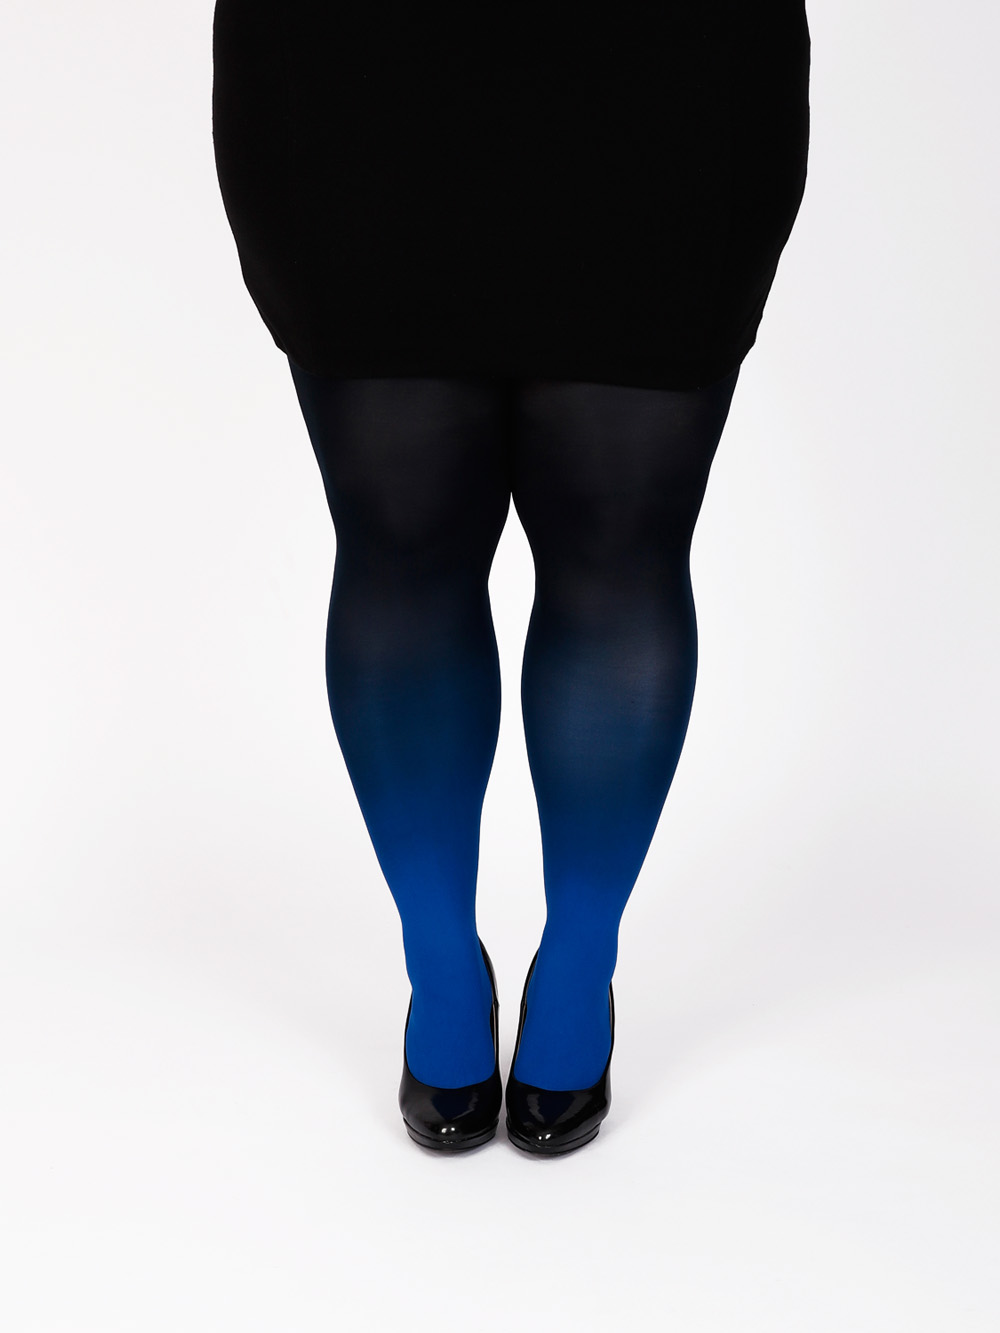 Plus Size Blue Black Tights Virivee Tights Unique Tights Designed And Made In Europe